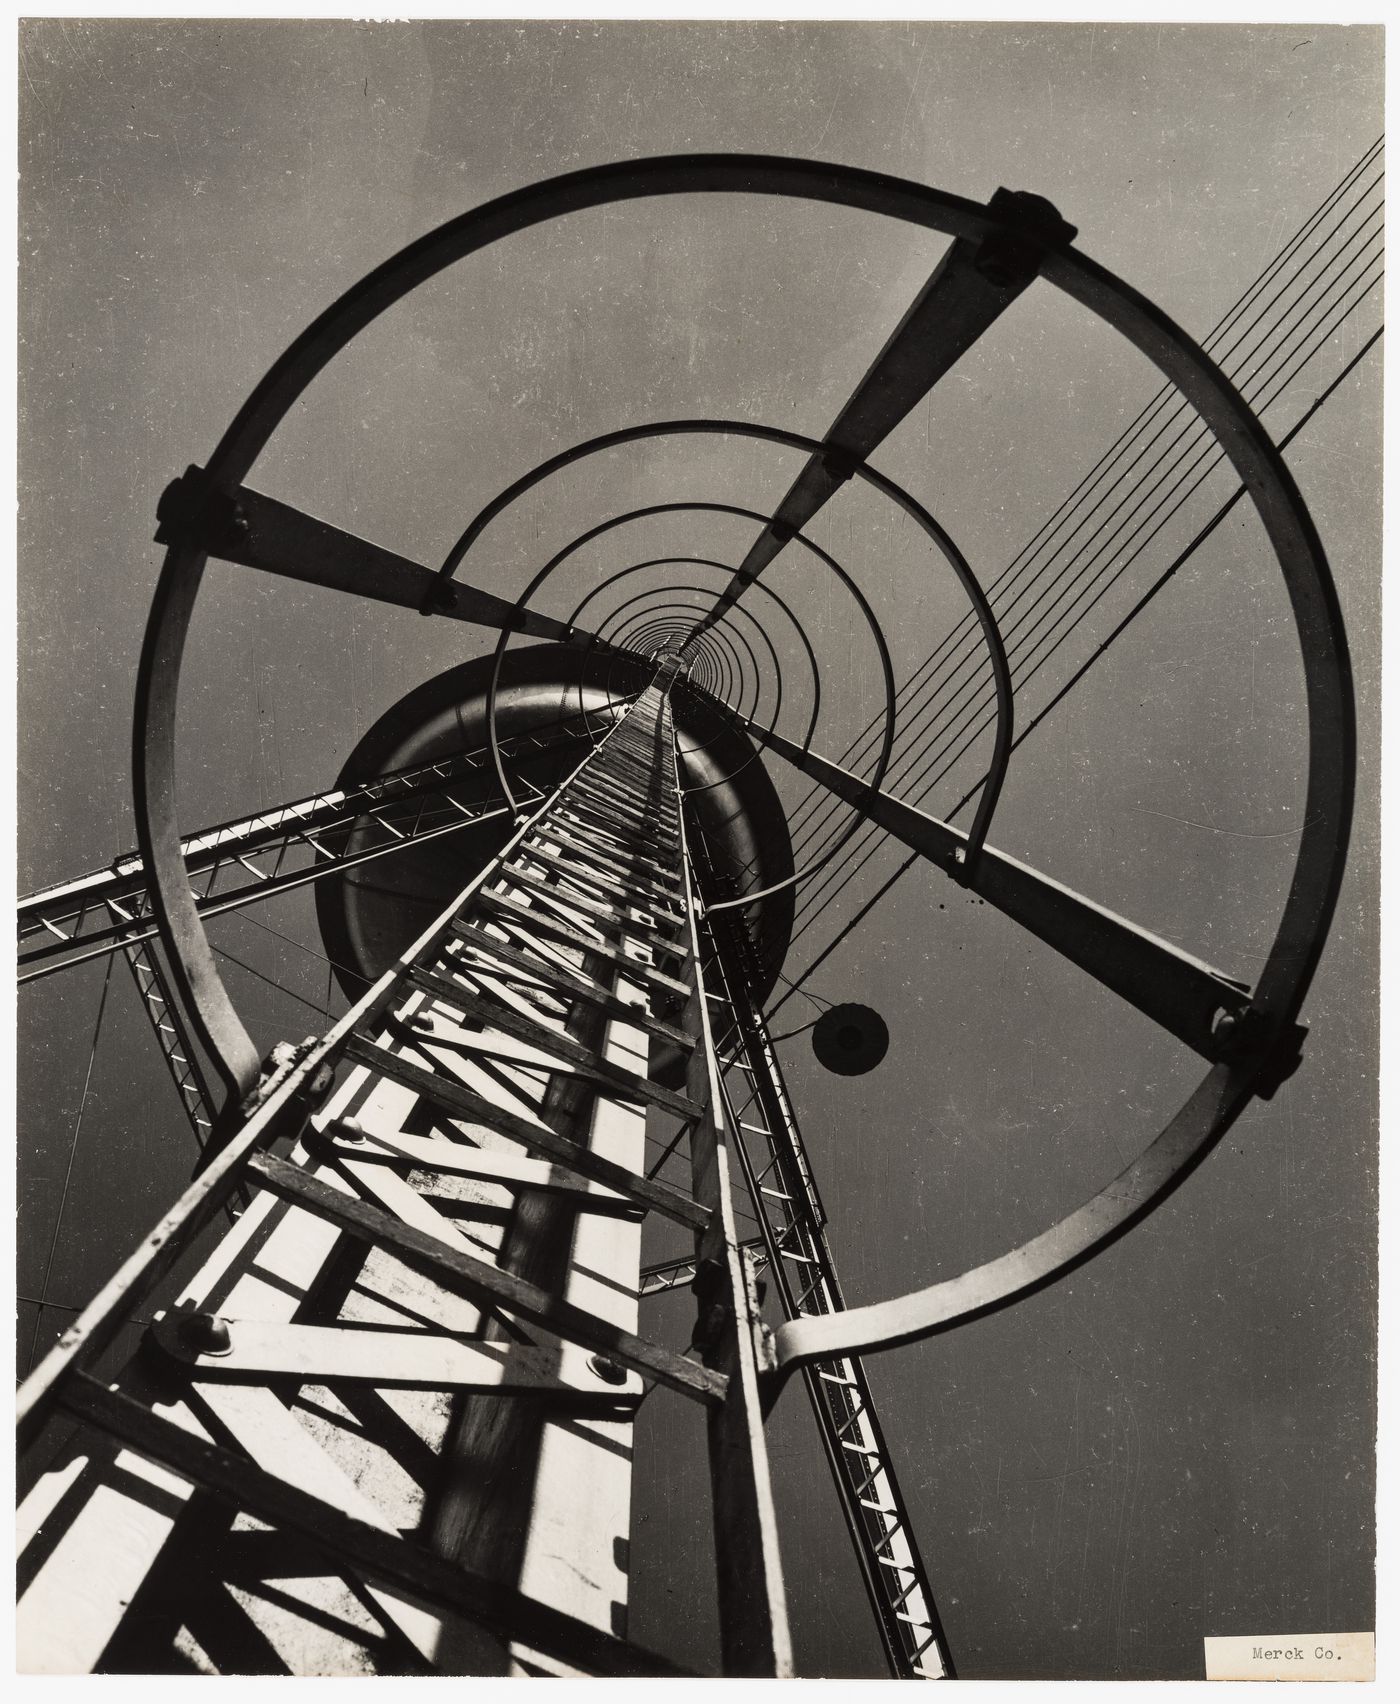 Transmission Tower (ca. 1950): View from the base looking up